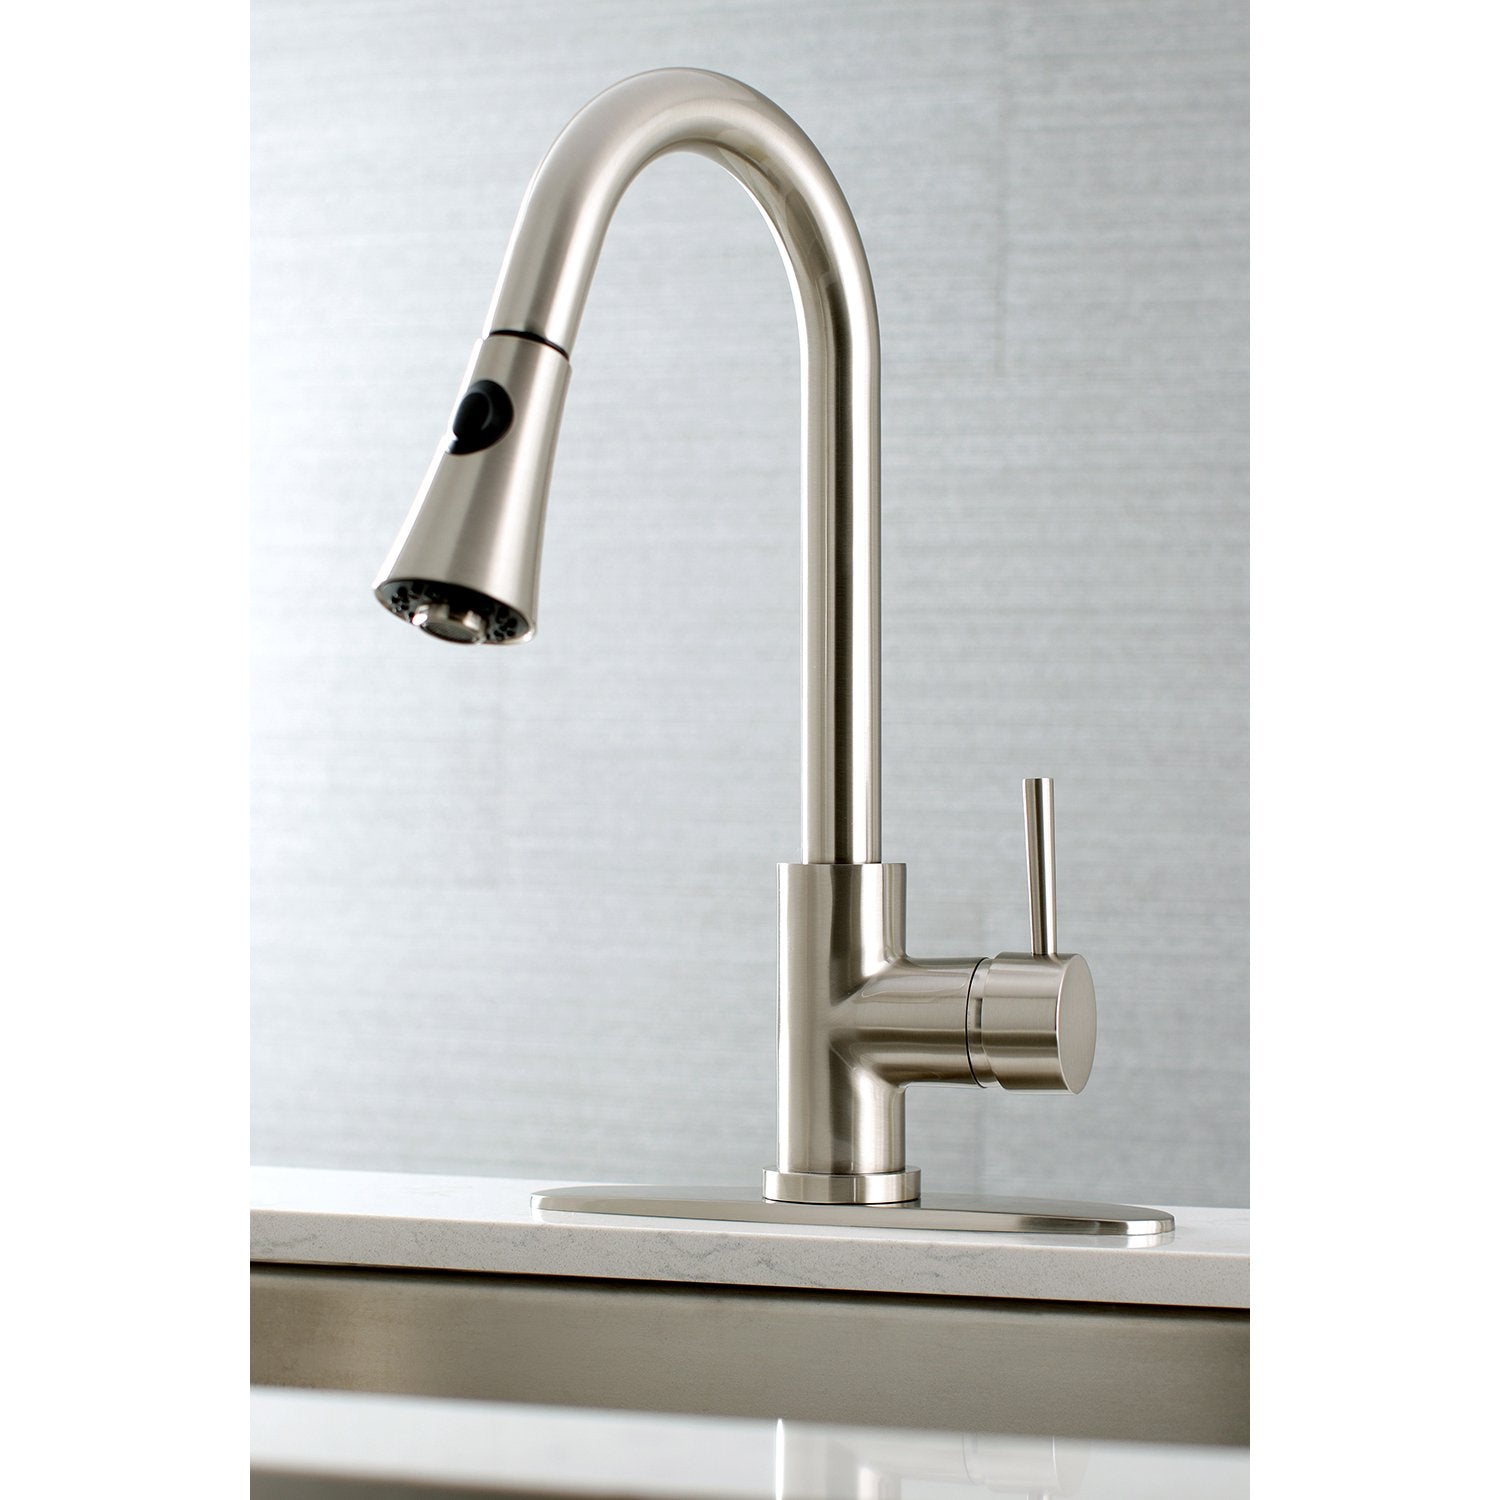 Kingston Brass Gourmetier Concord Deck Mount Single-Handle Pull-Down Kitchen Faucet